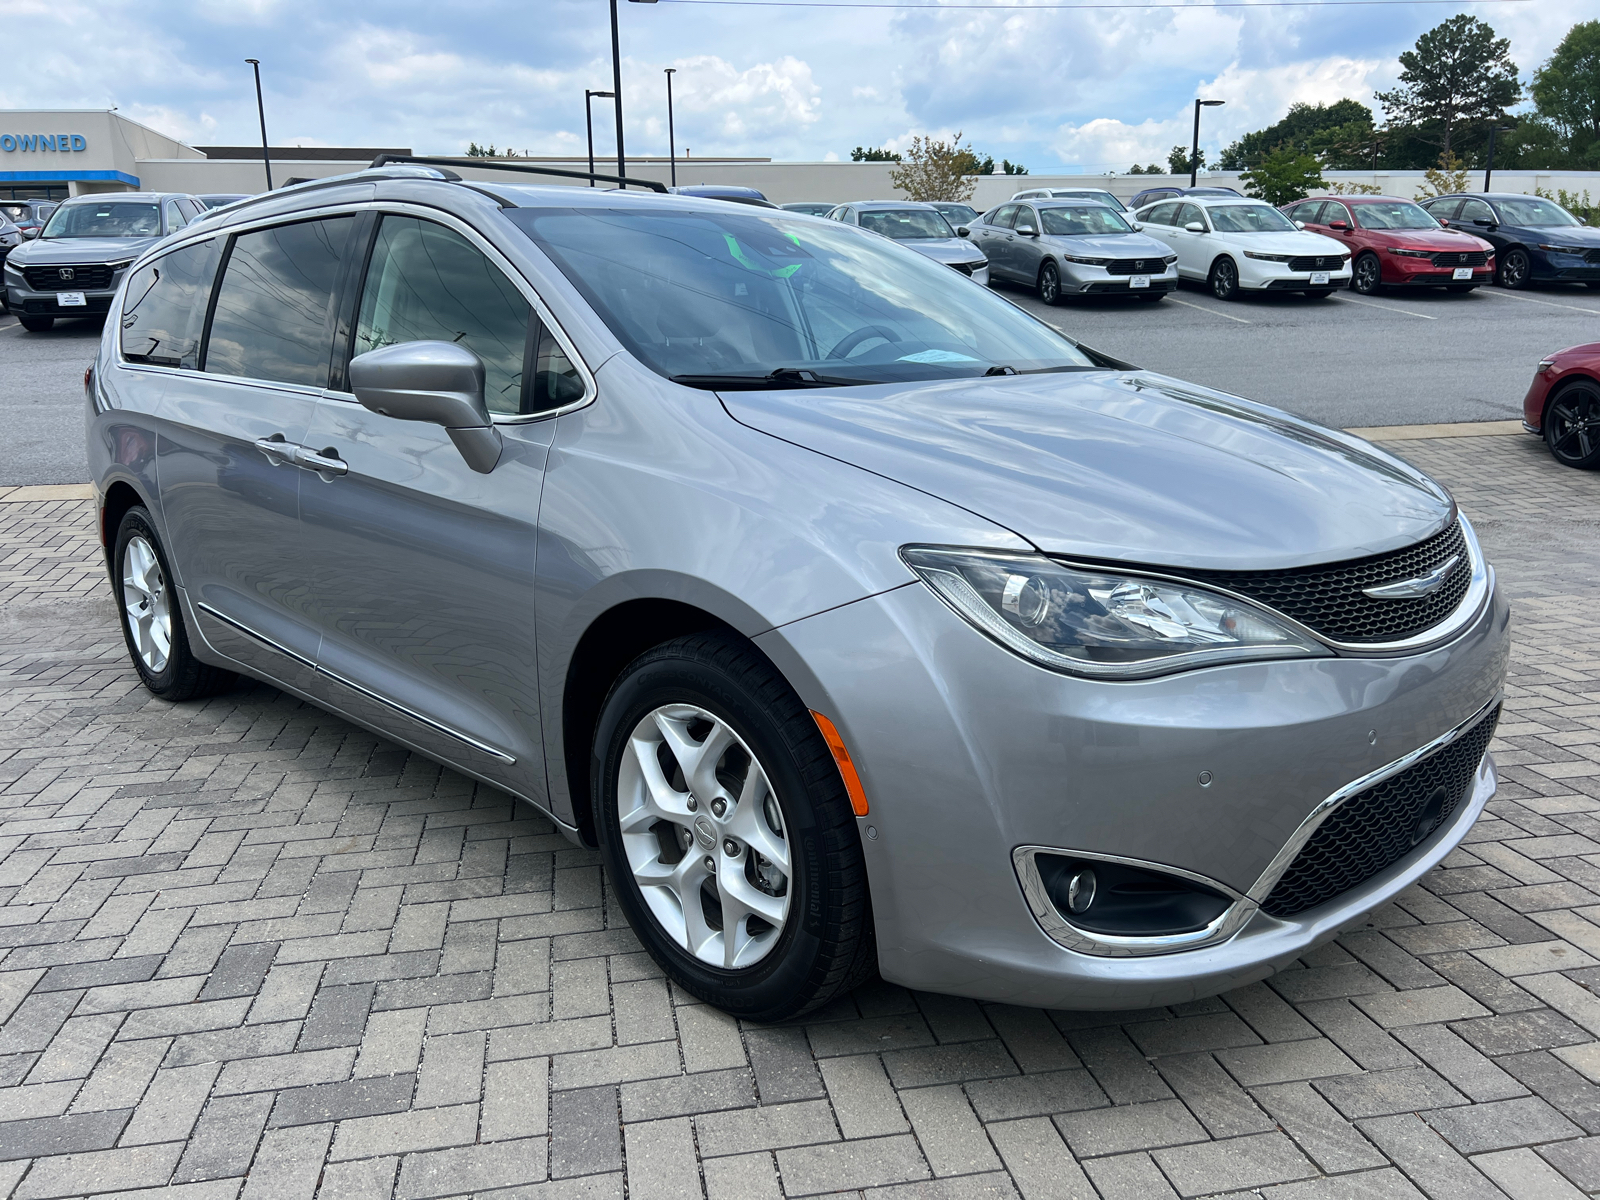 2018 Chrysler Pacifica Touring L 1